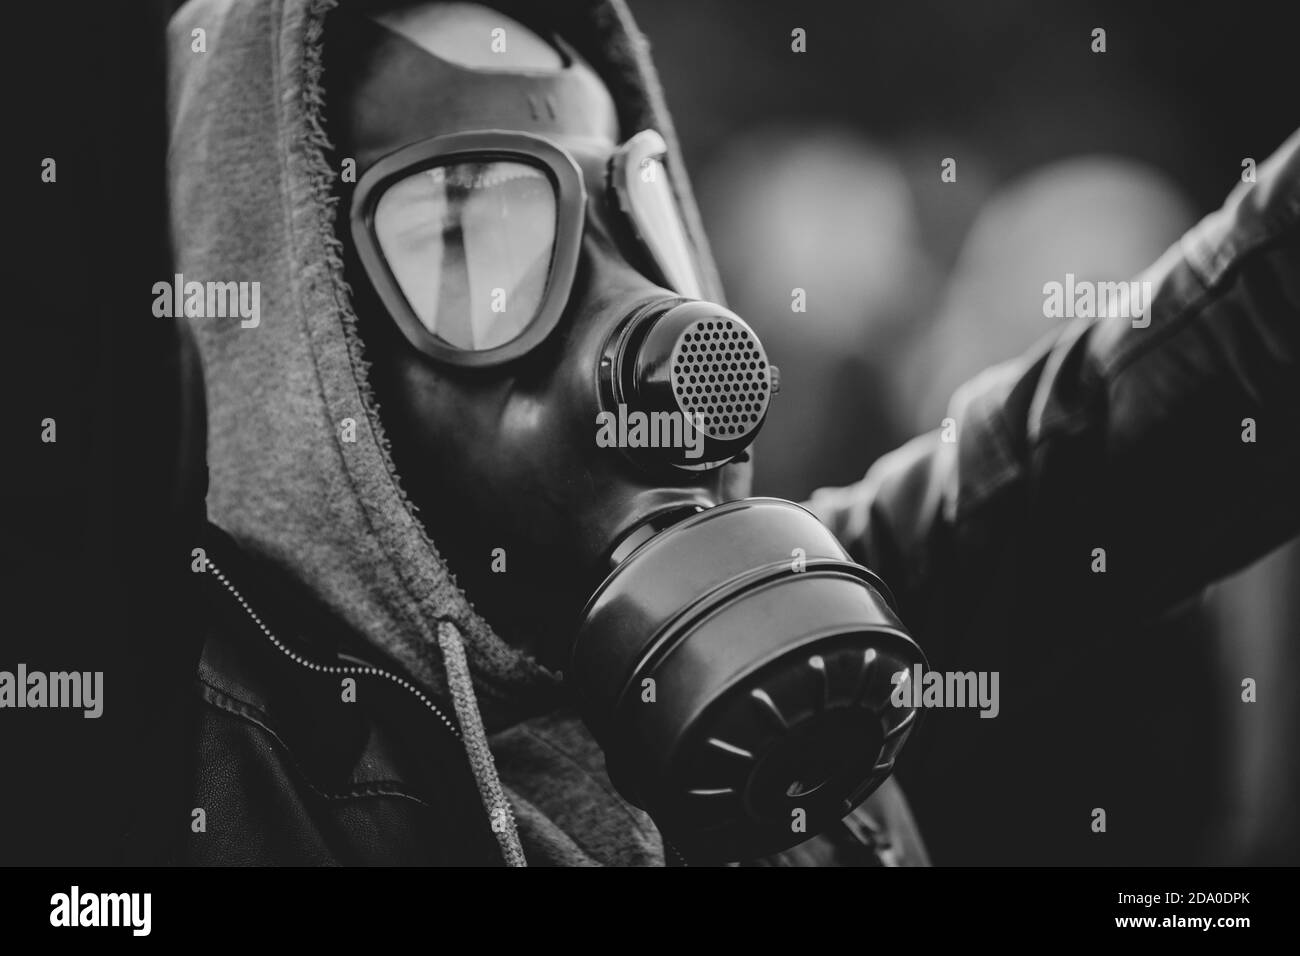 Shallow depth of field (selective focus) image with a protestor wearing a hoodie and a military gas mask. Stock Photo